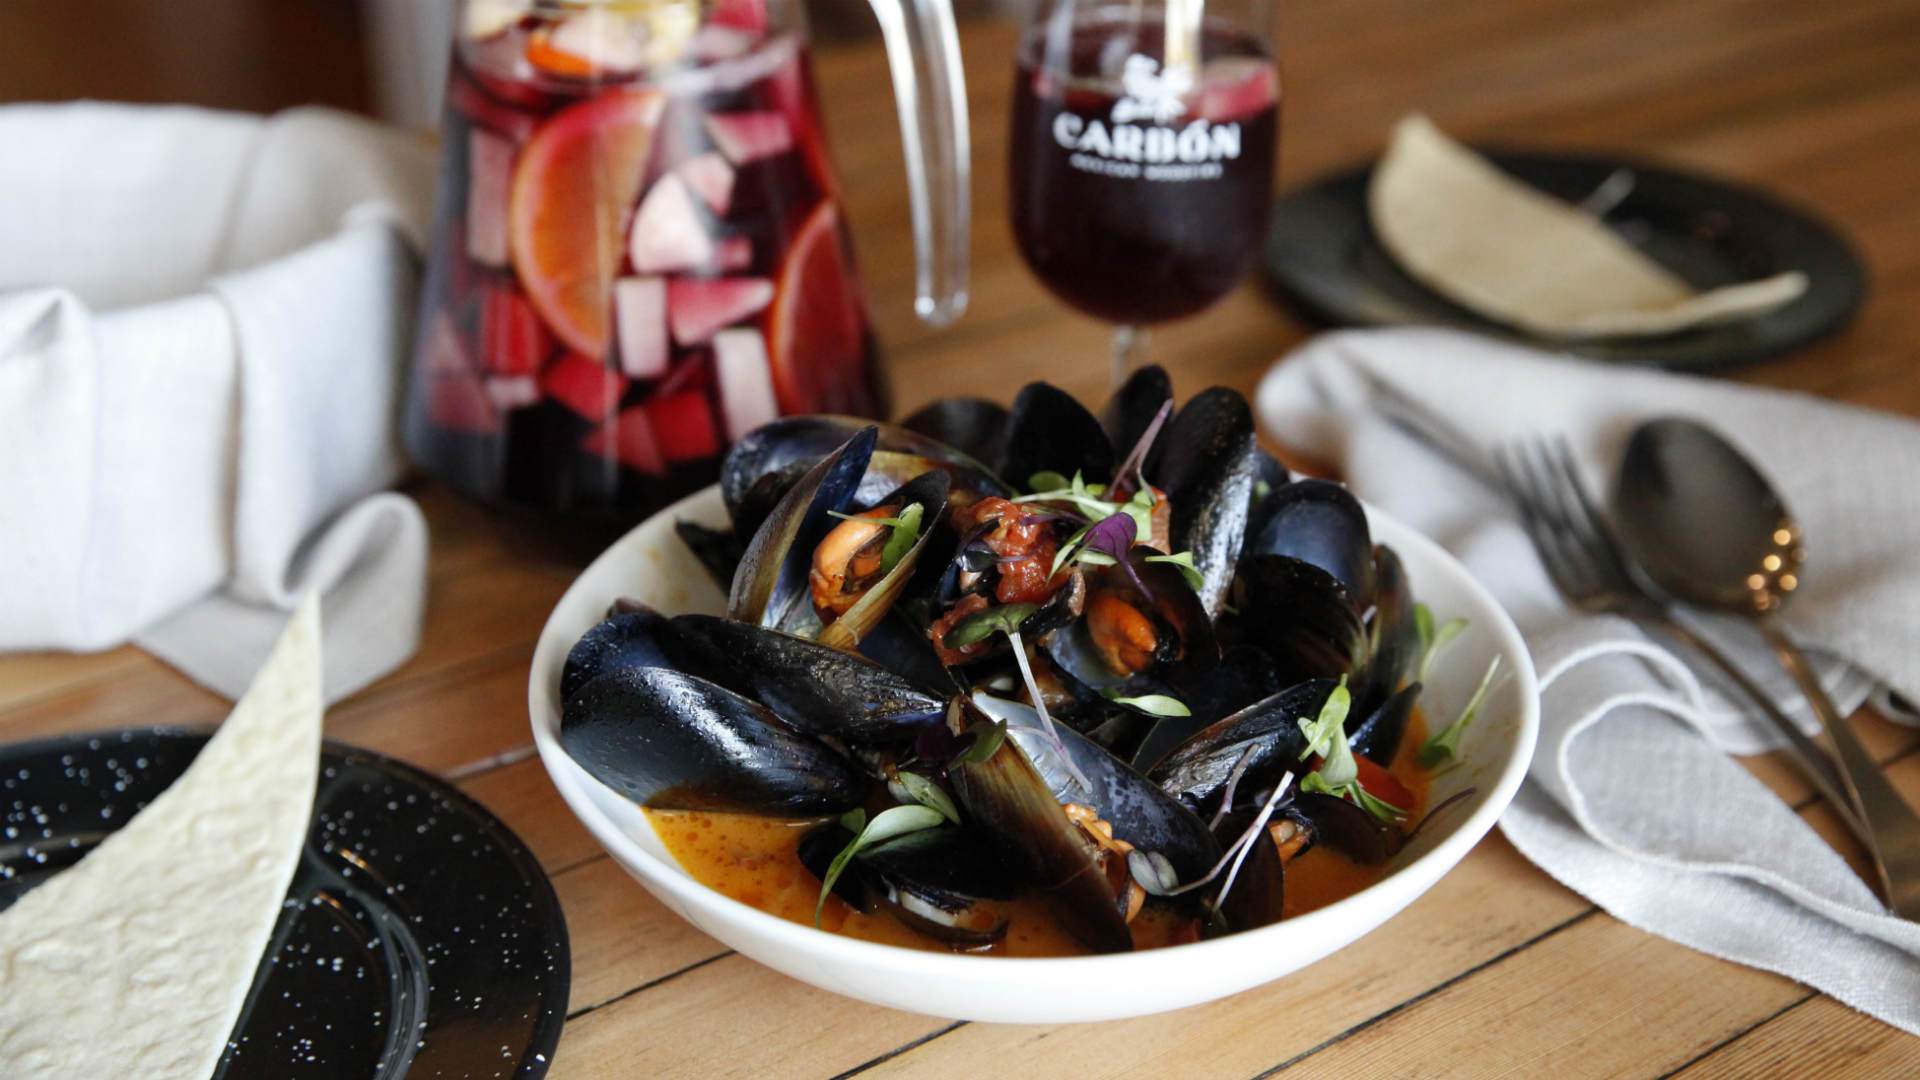 Carbon's Mussels and Sangria Nights